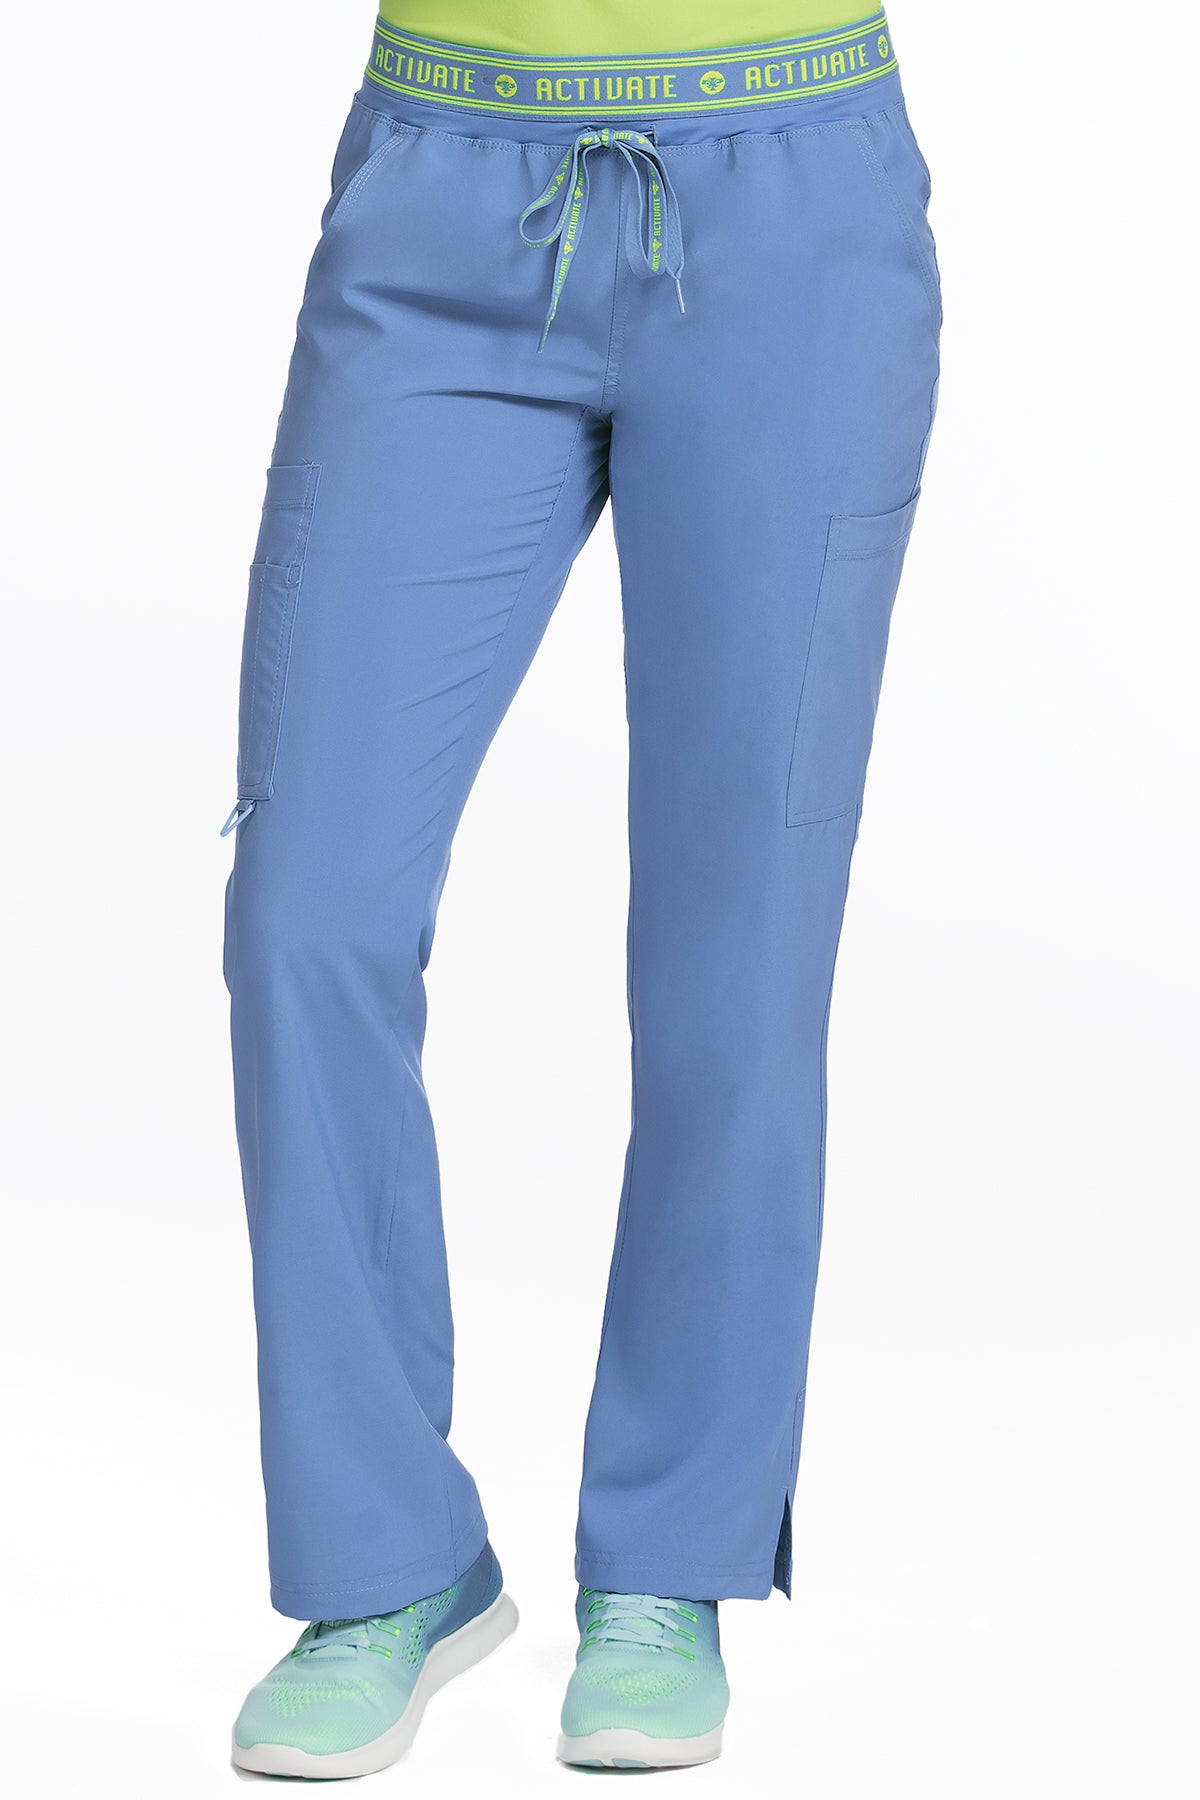 Yoga 2 Cargo Pocket Pant by Med Couture (Petite) XS-XL /  Ceil